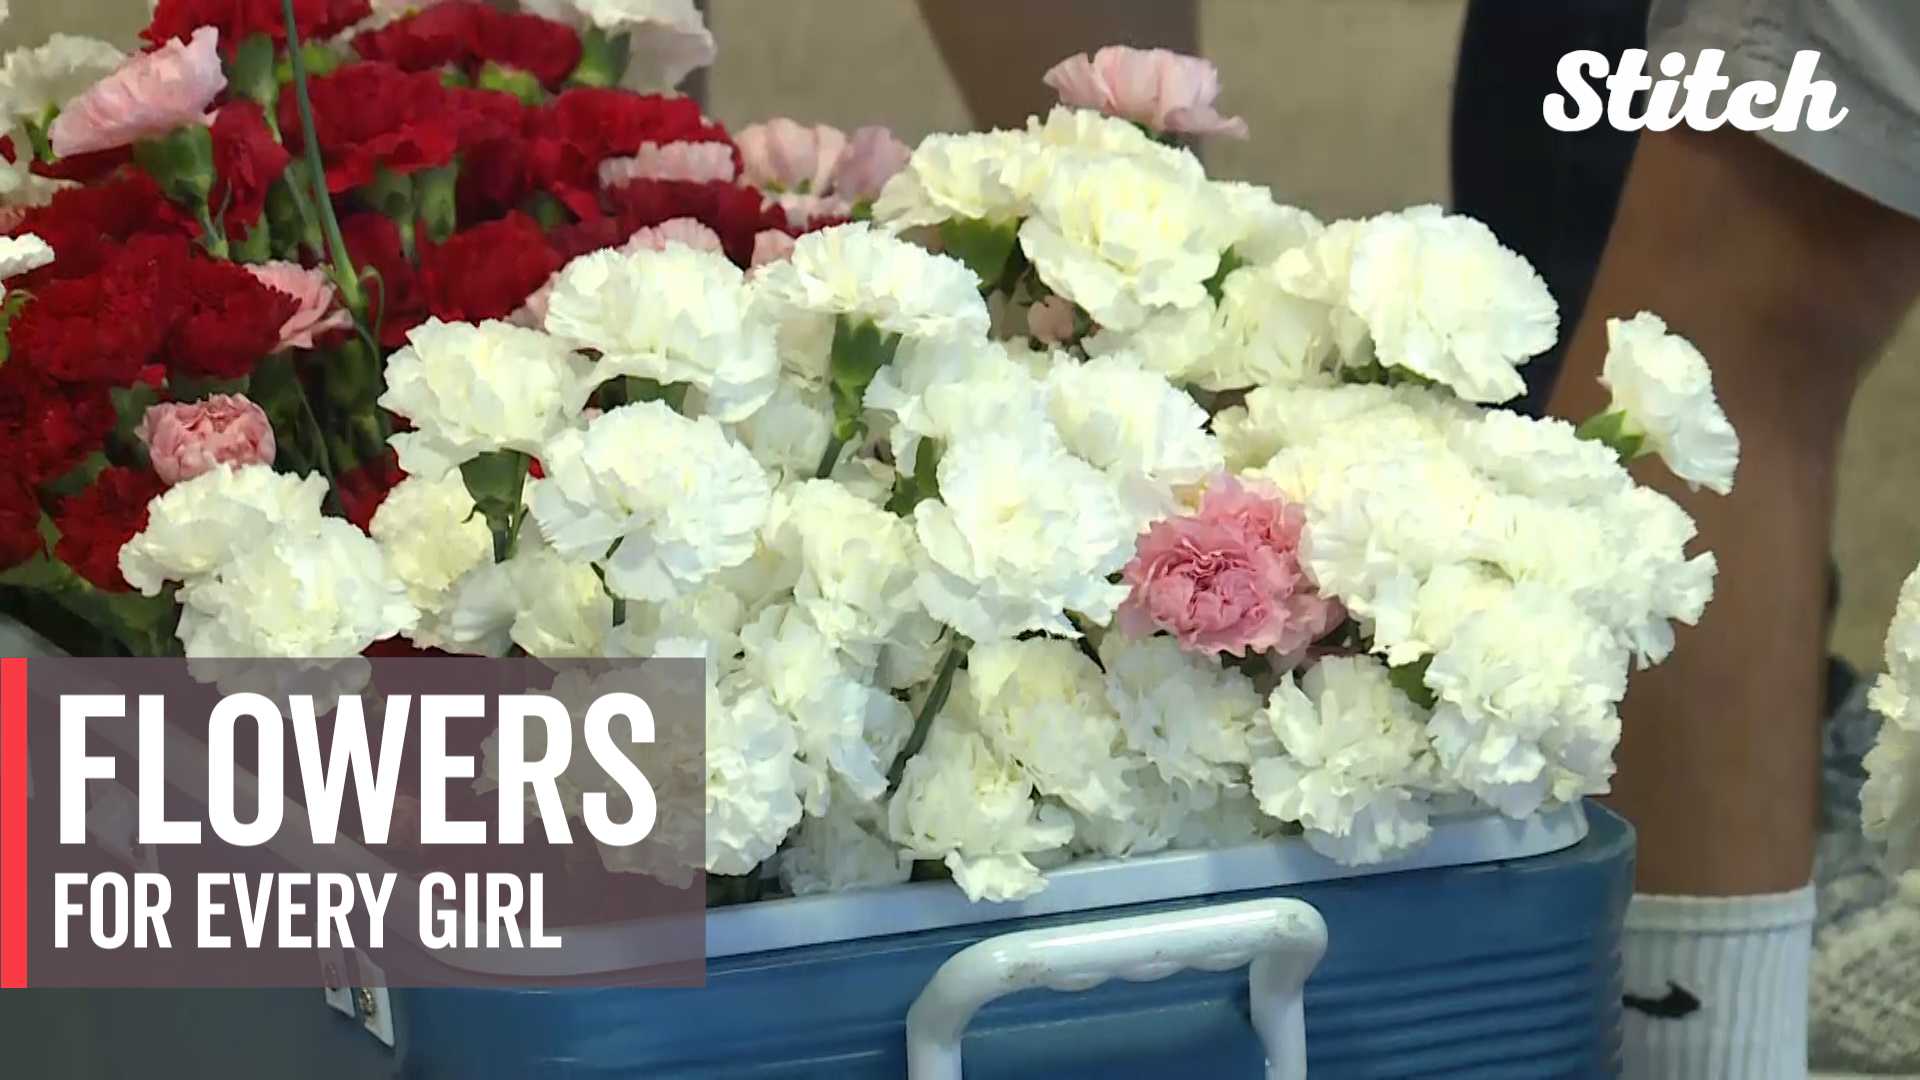 Two high-school seniors deliver flowers to every girl at school